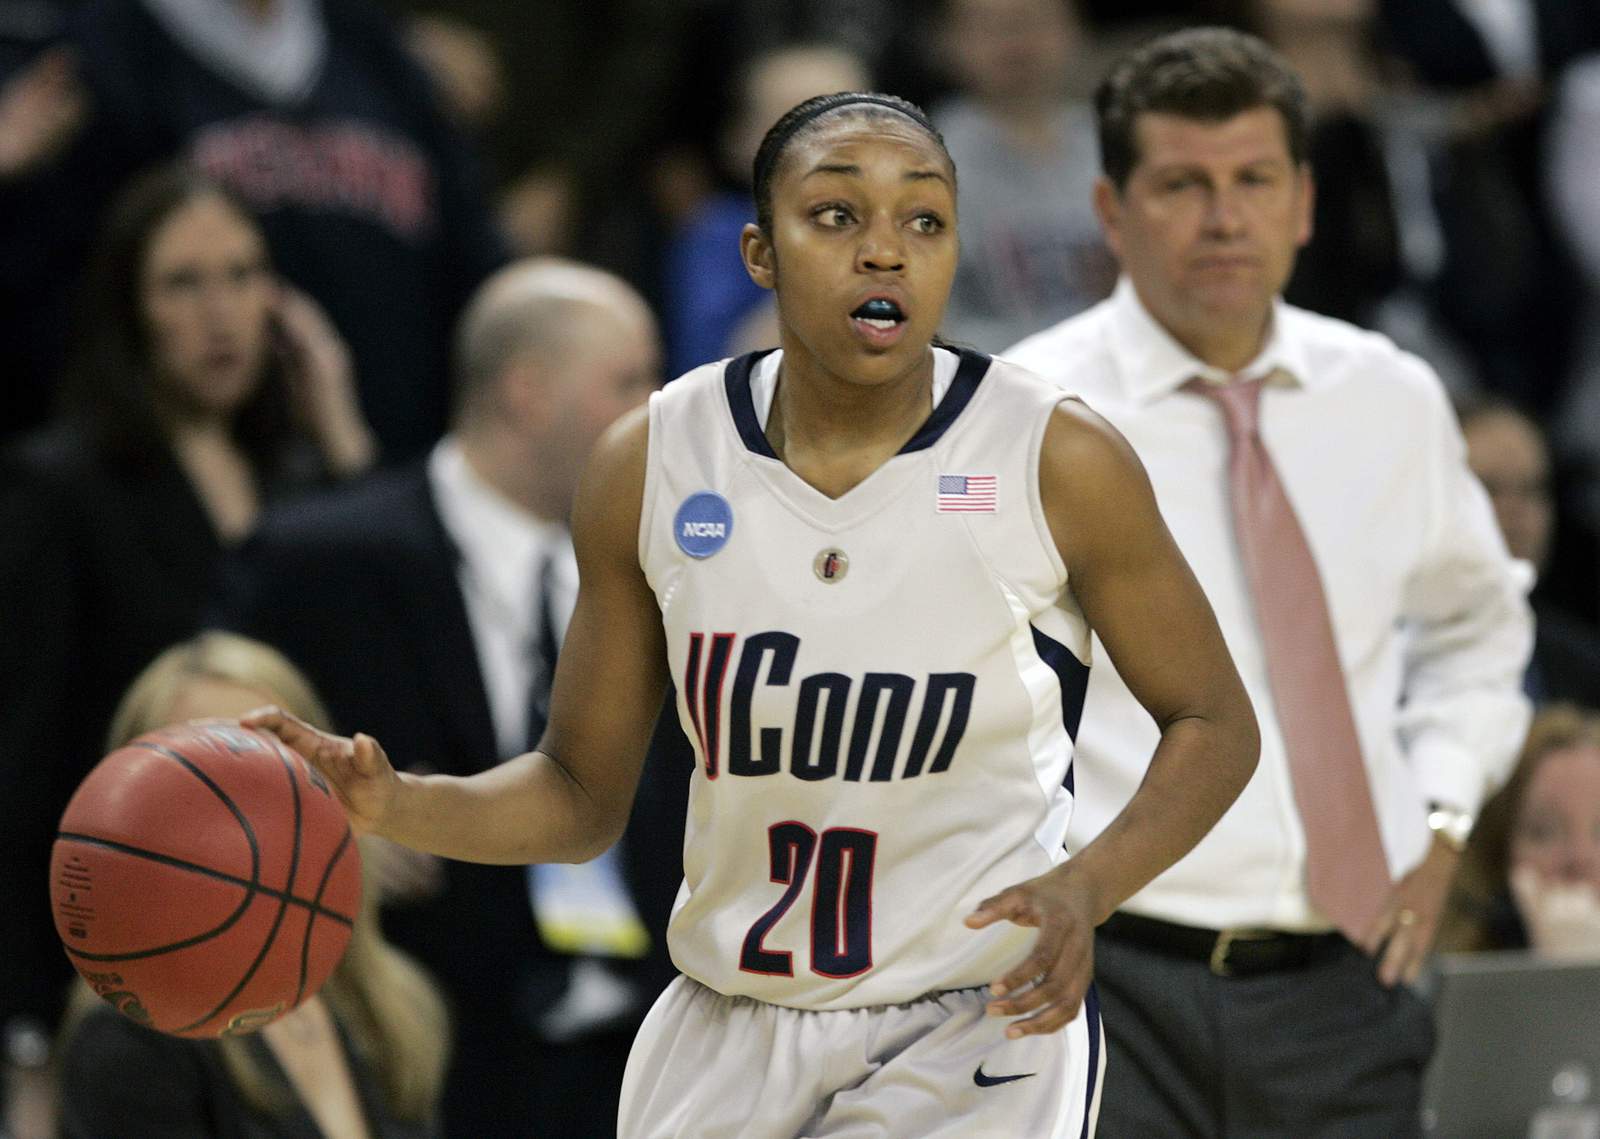 Trio of former UConn greats leading social justice charge